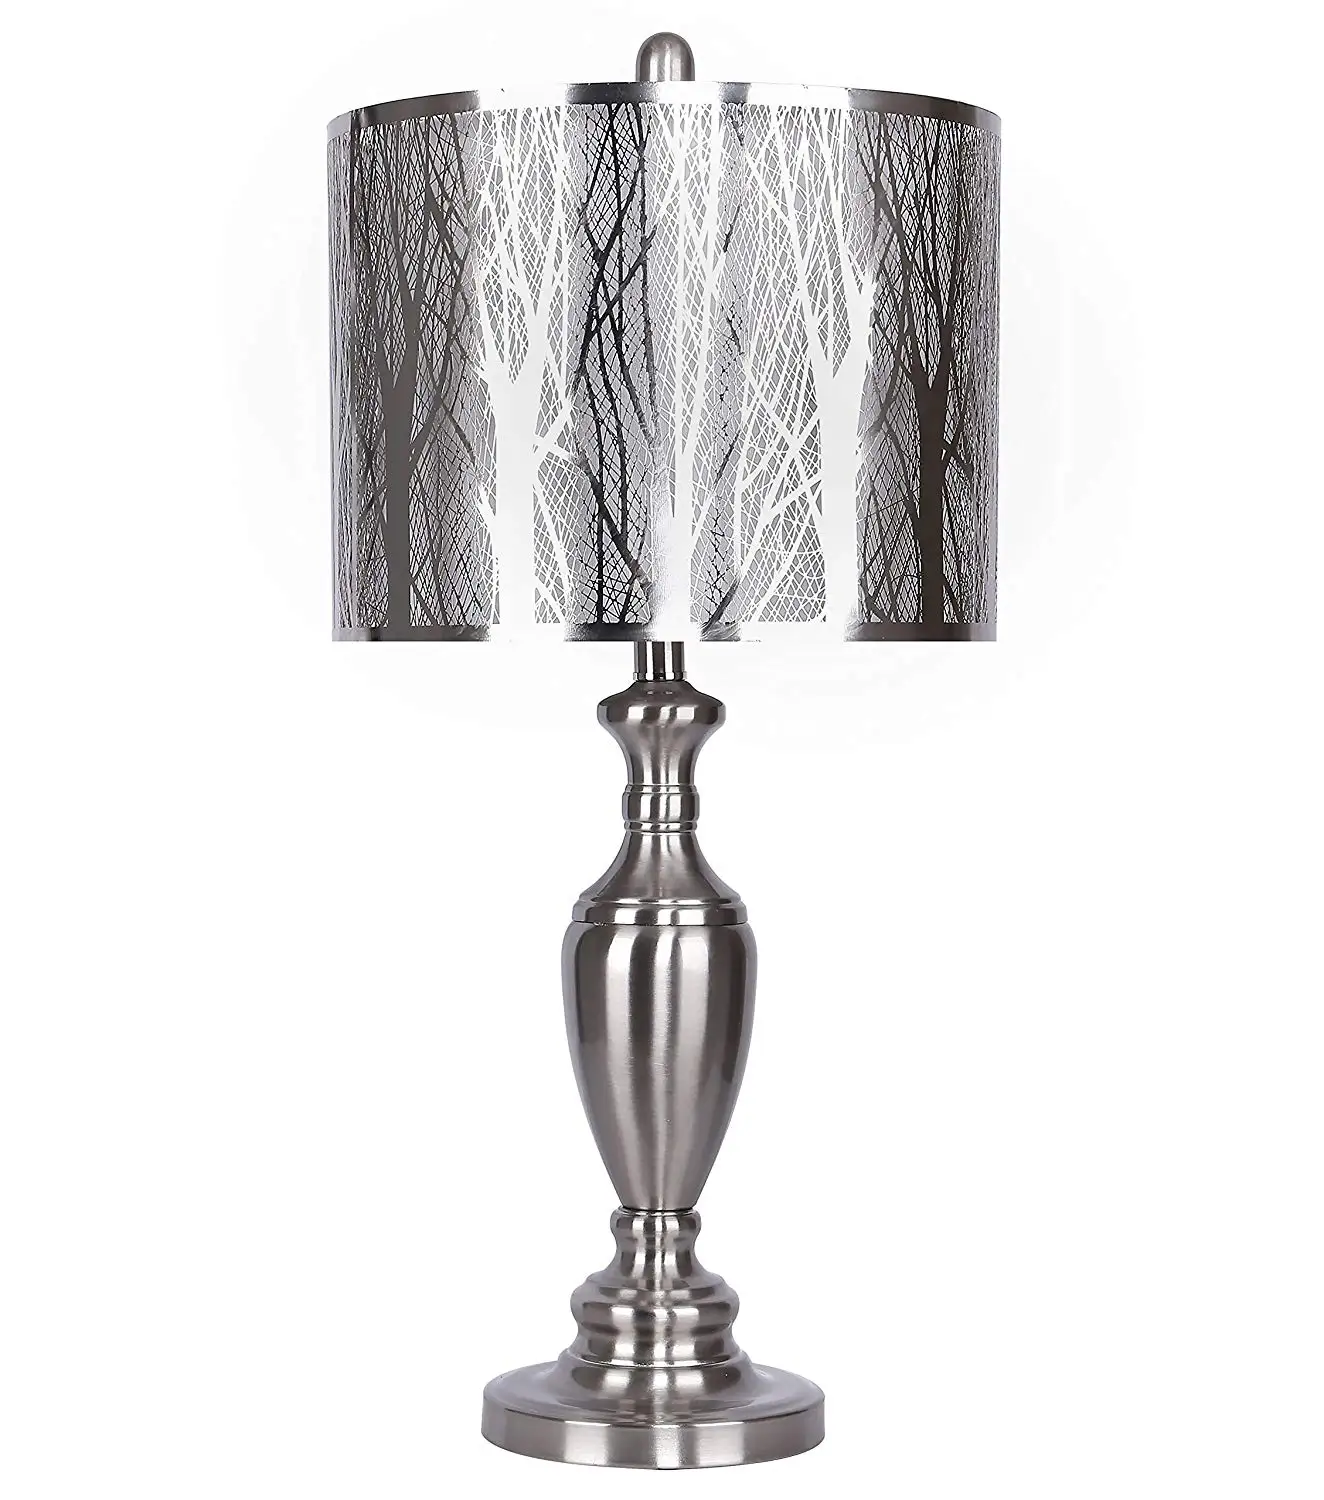 Cheap Table Lamp Shade, find Table Lamp Shade deals on line at Alibaba.com